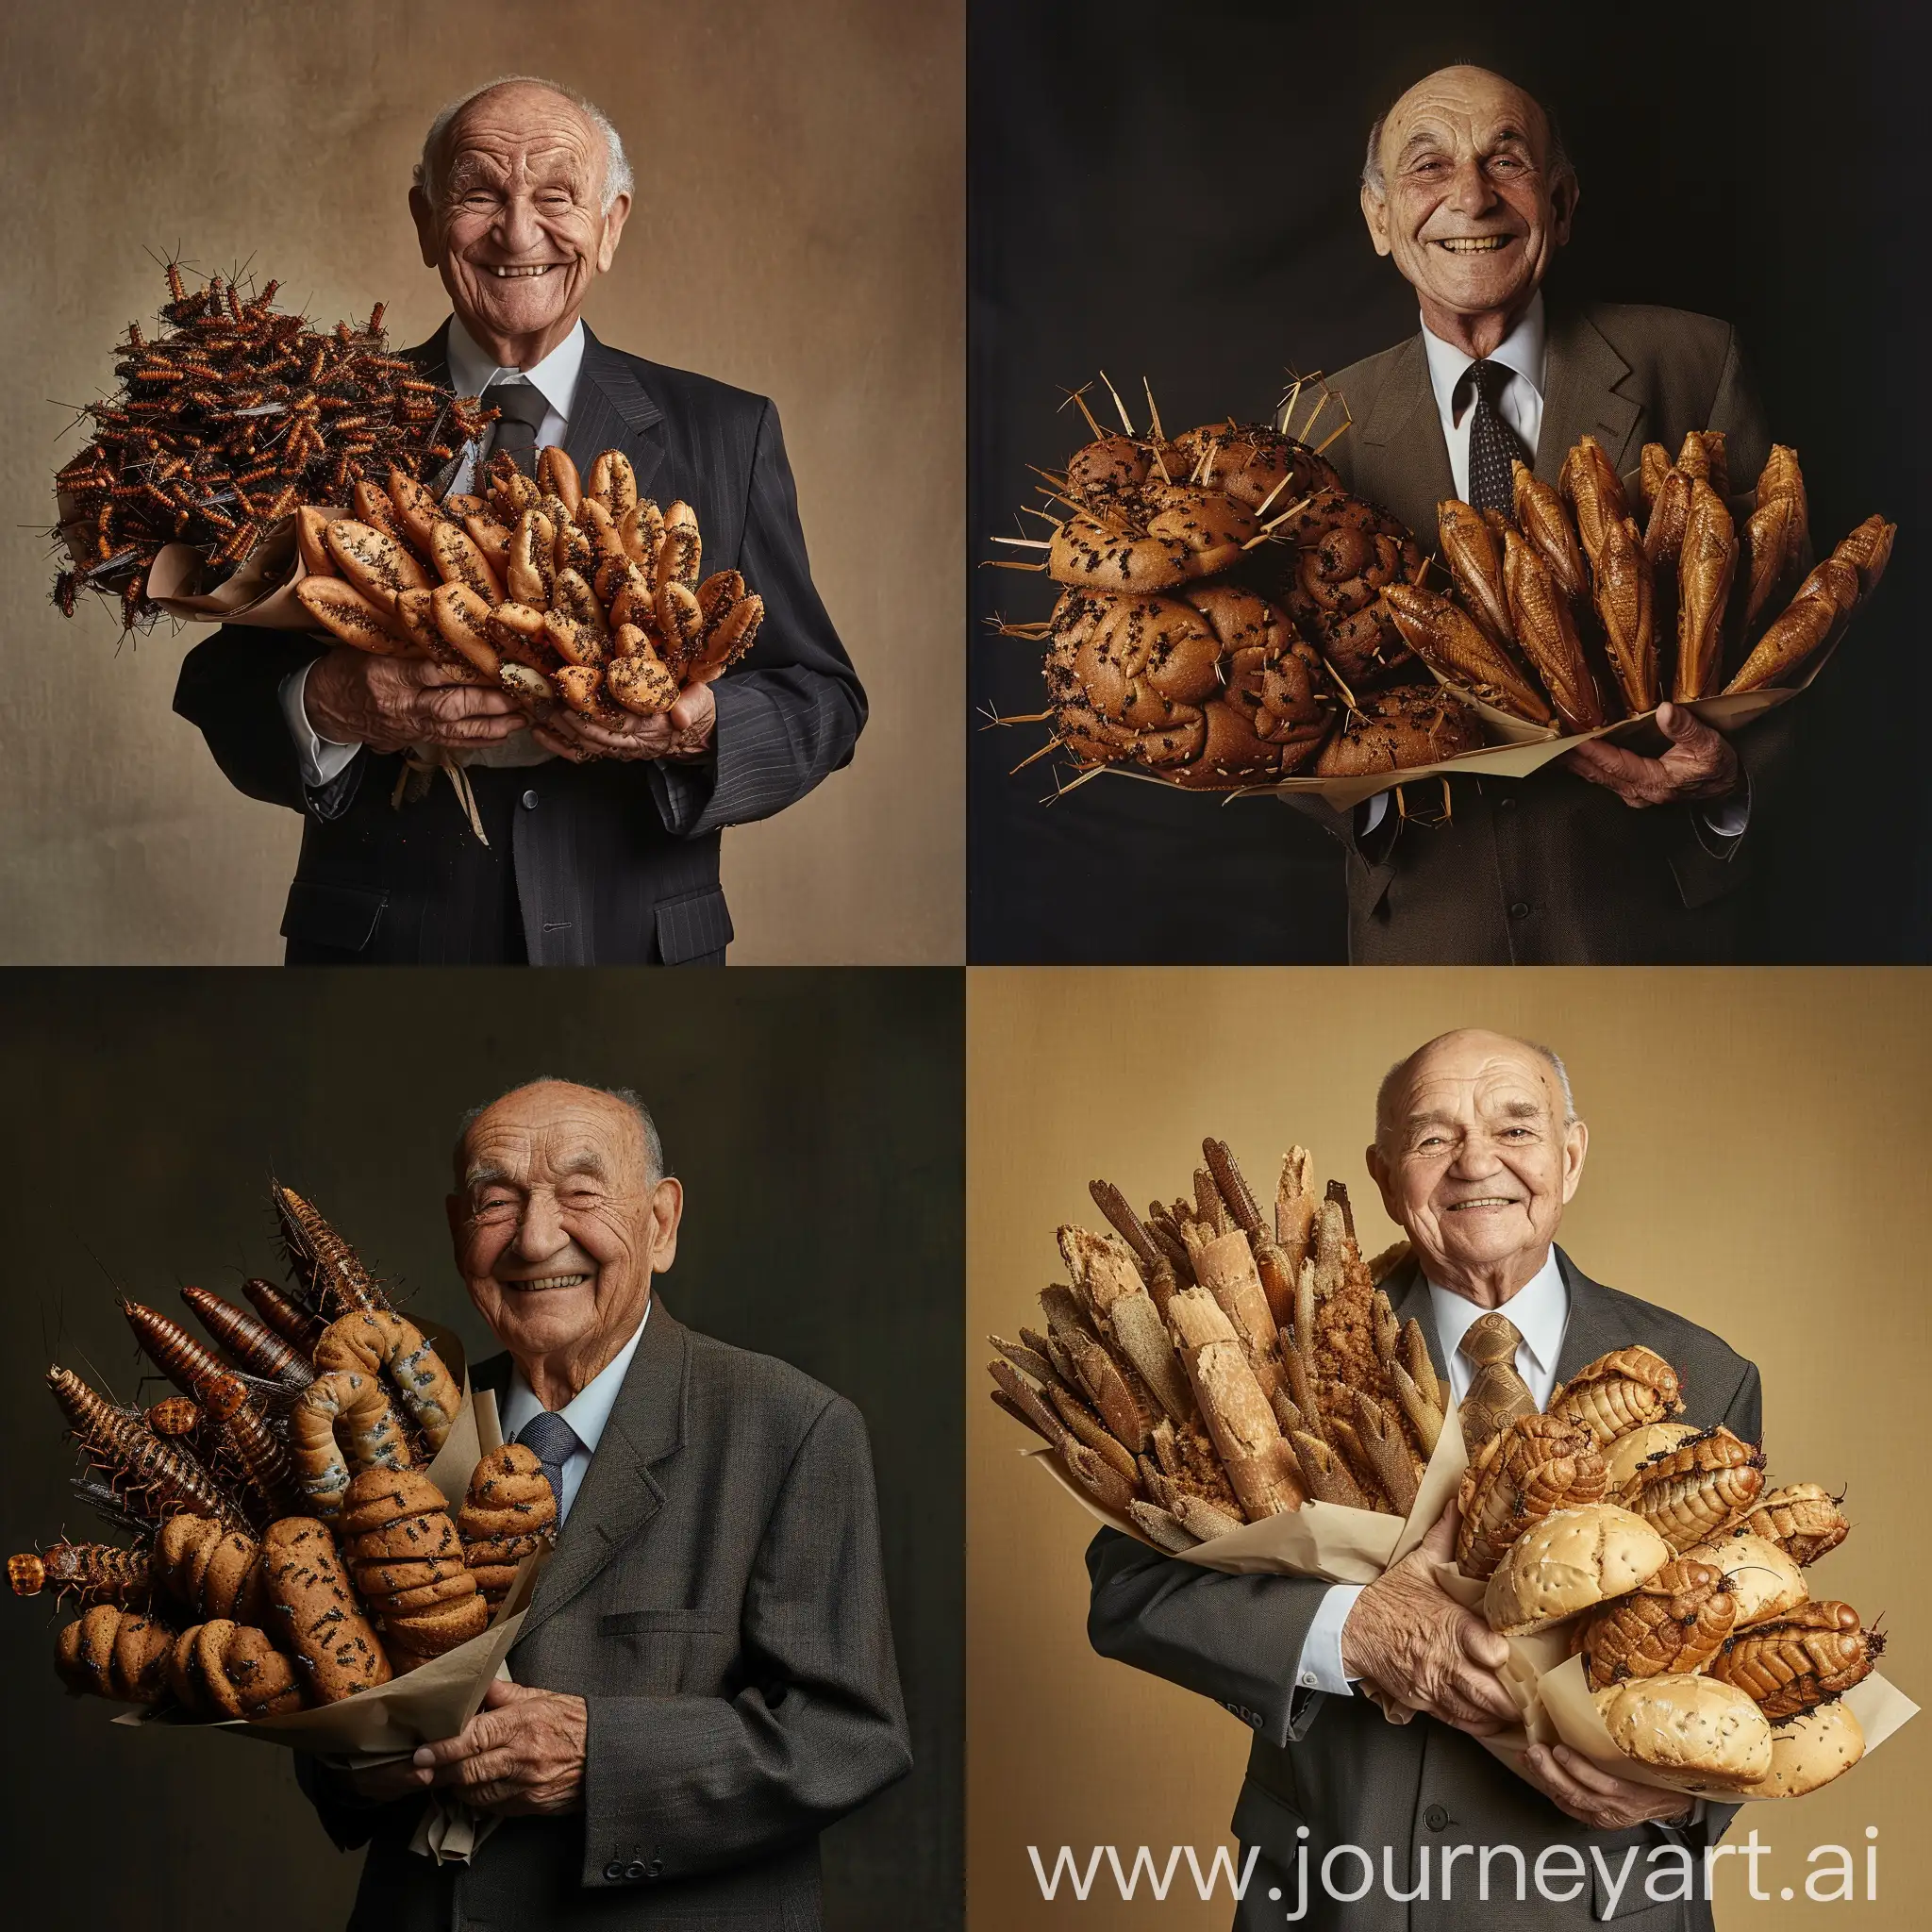 Elderly-Businessman-Smiling-with-Cricket-and-Dung-Fly-Bread-Bouquet